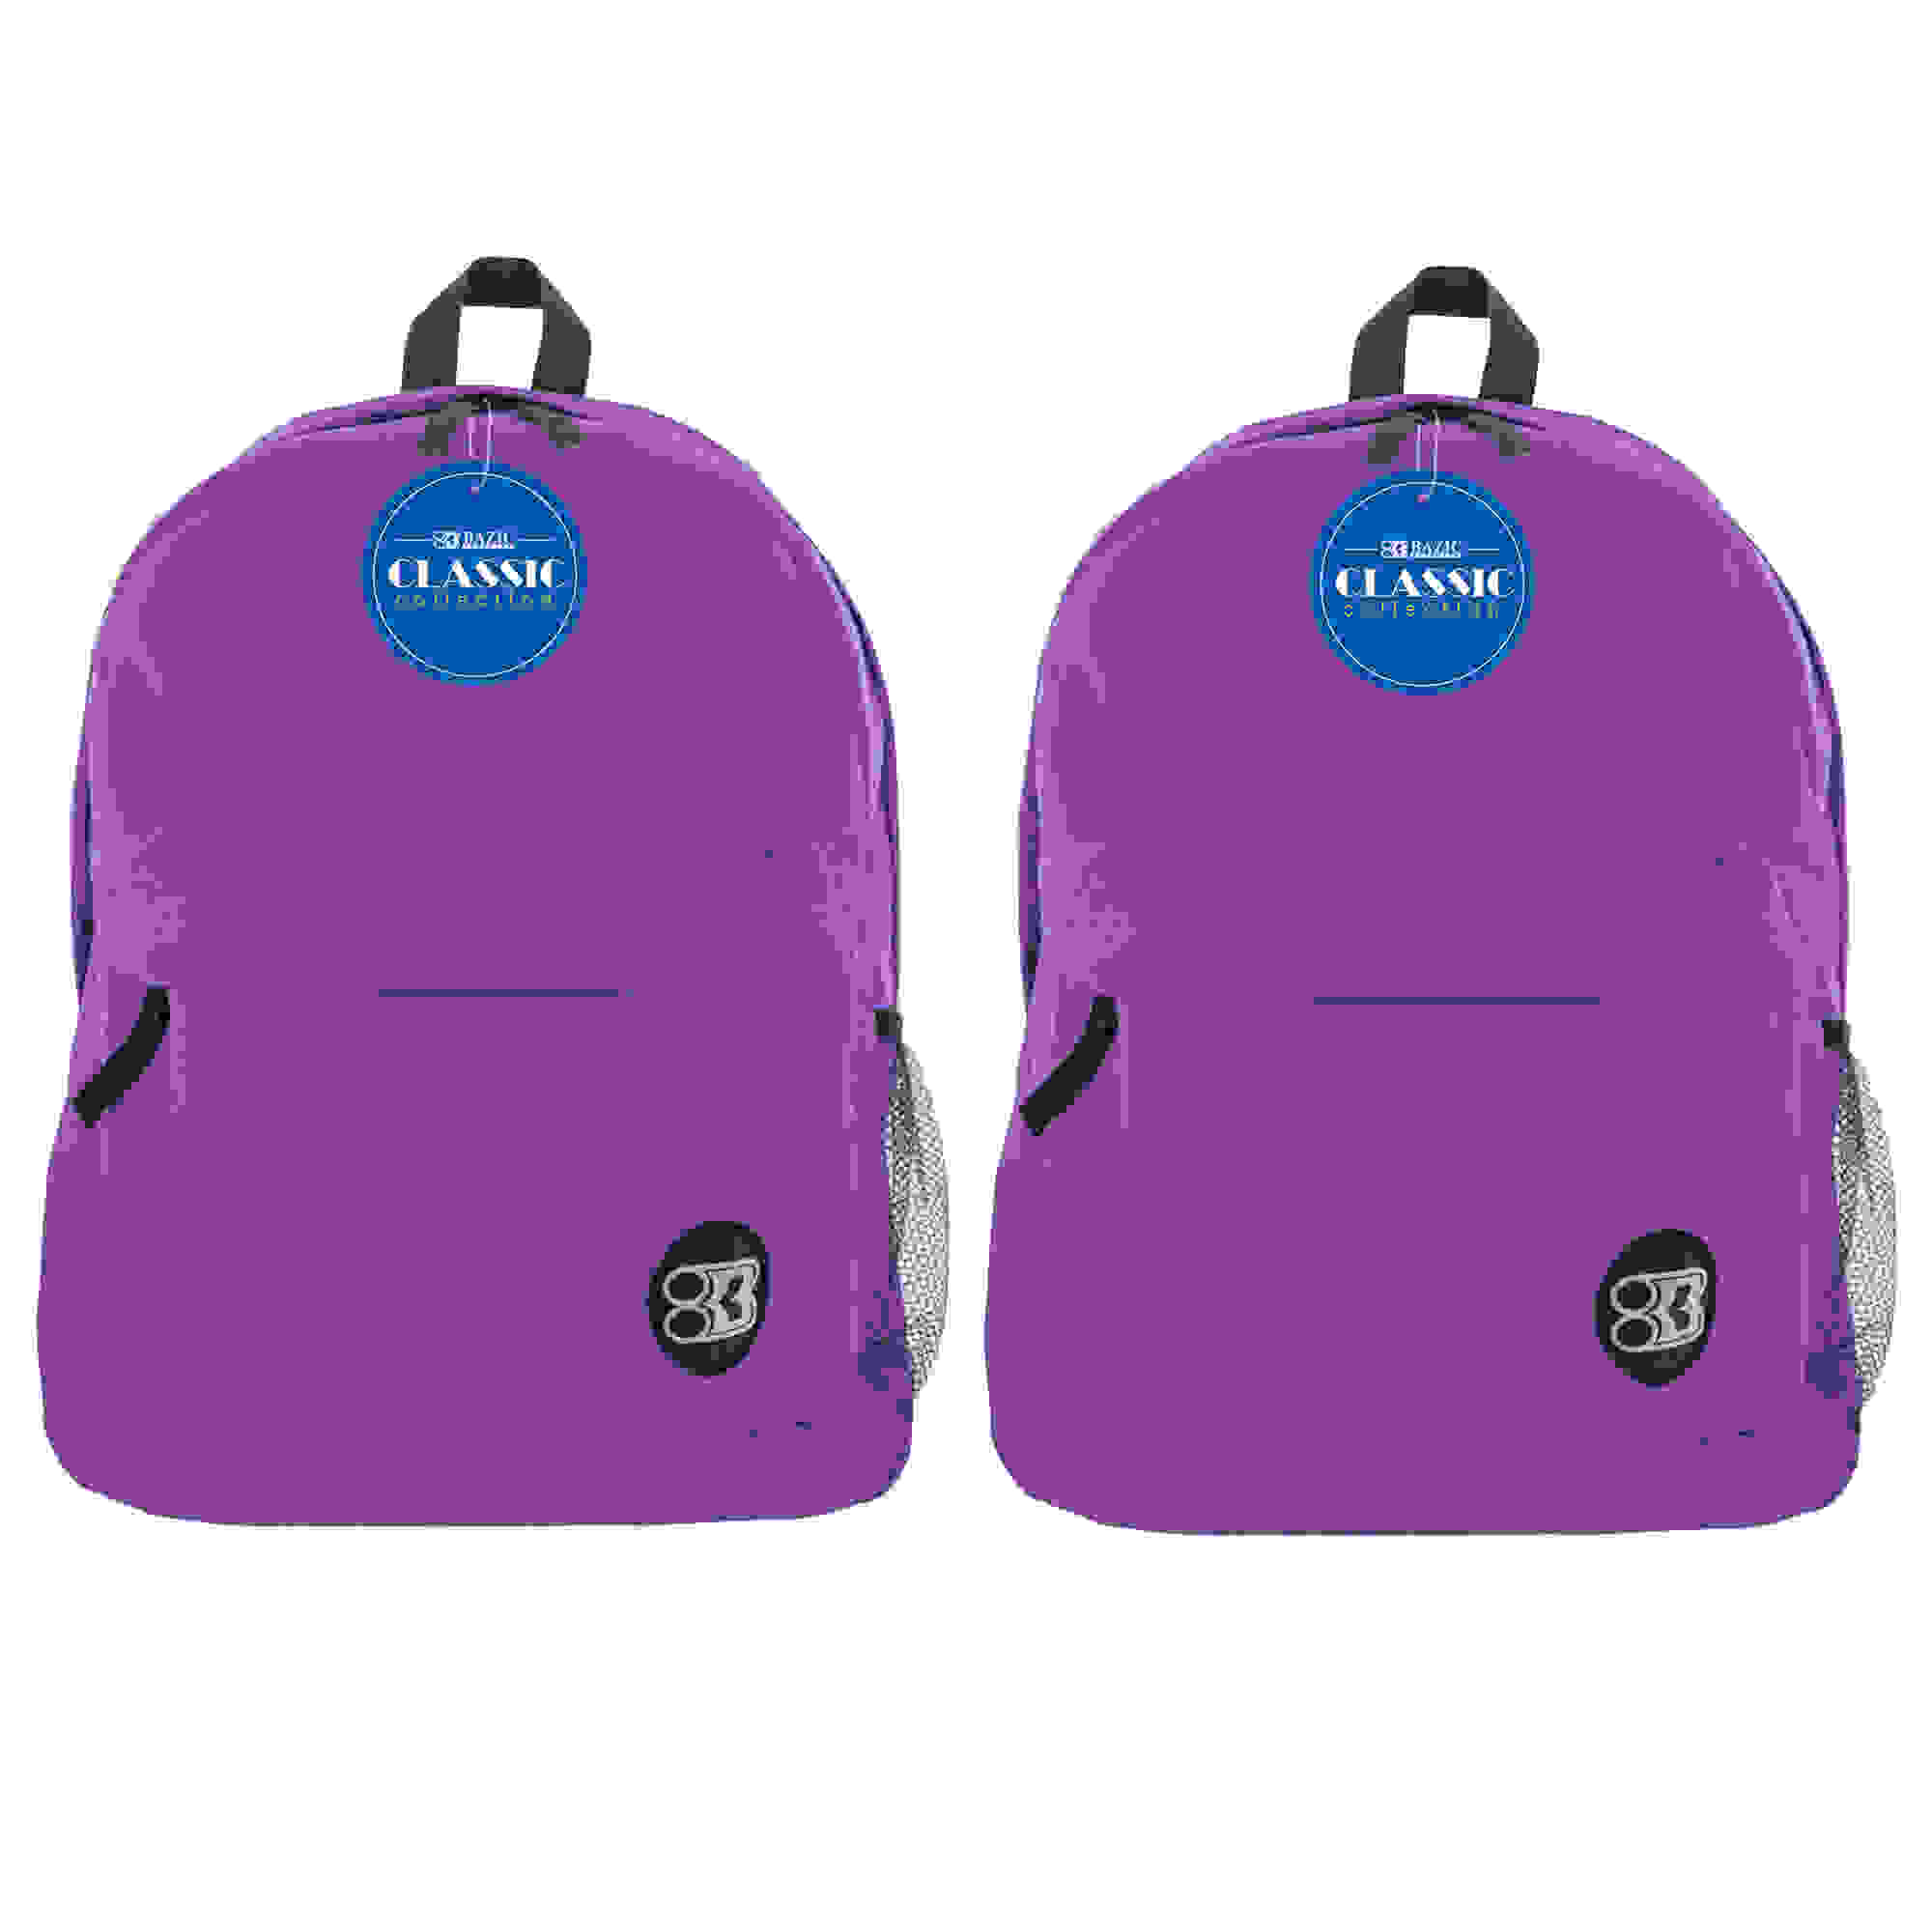 Classic Backpack 17" Purple, Pack of 2